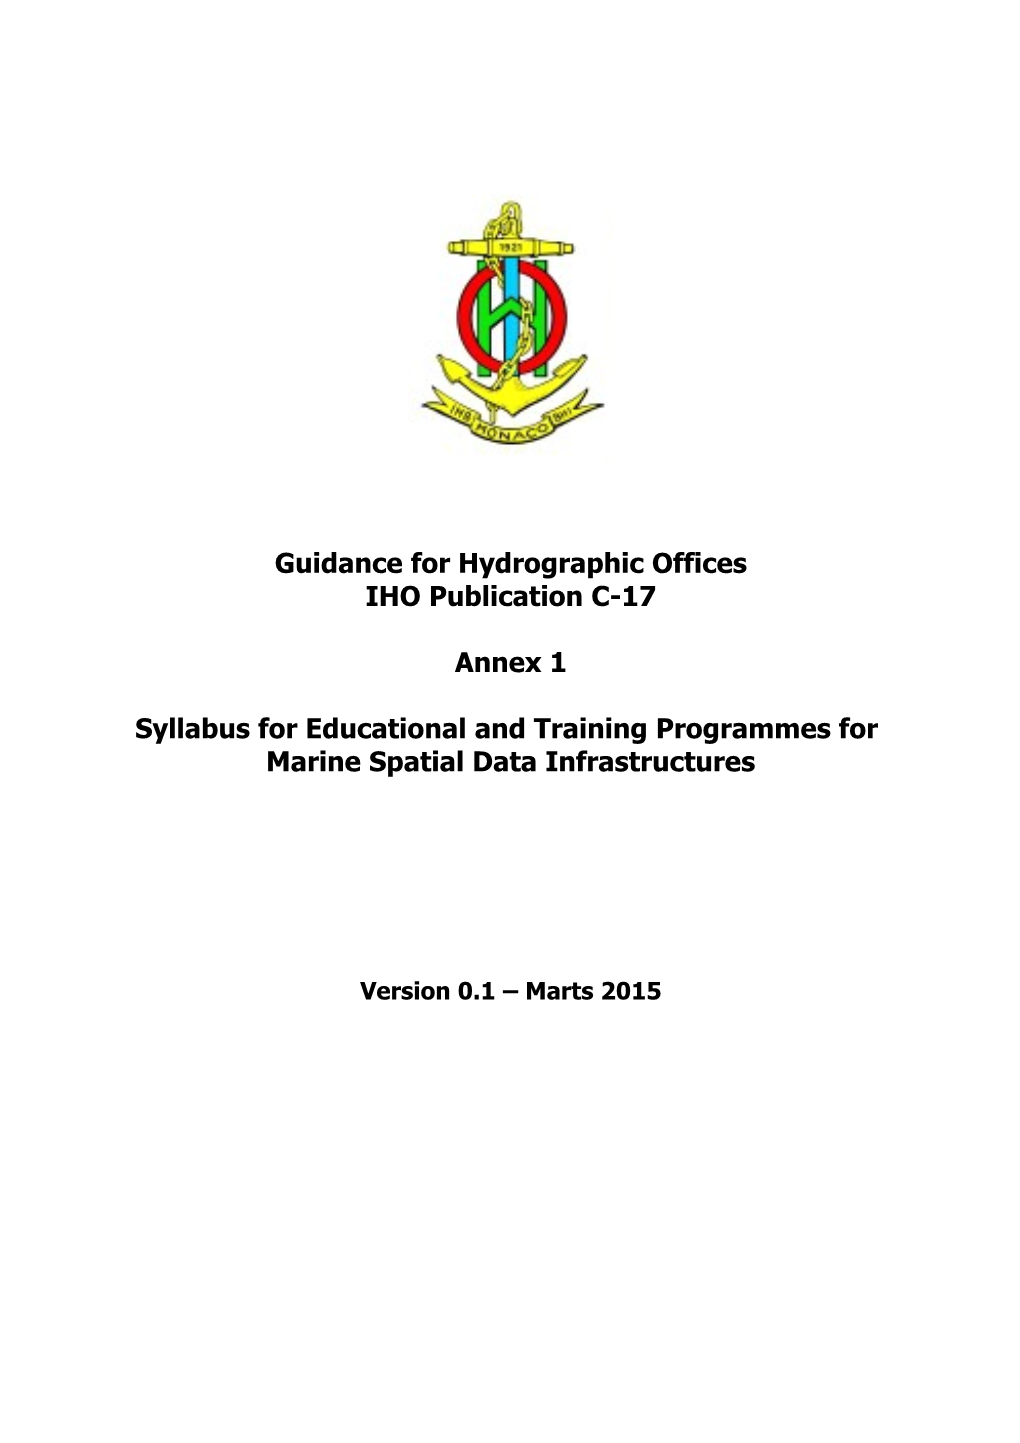 Guidance for Hydrographic Offices